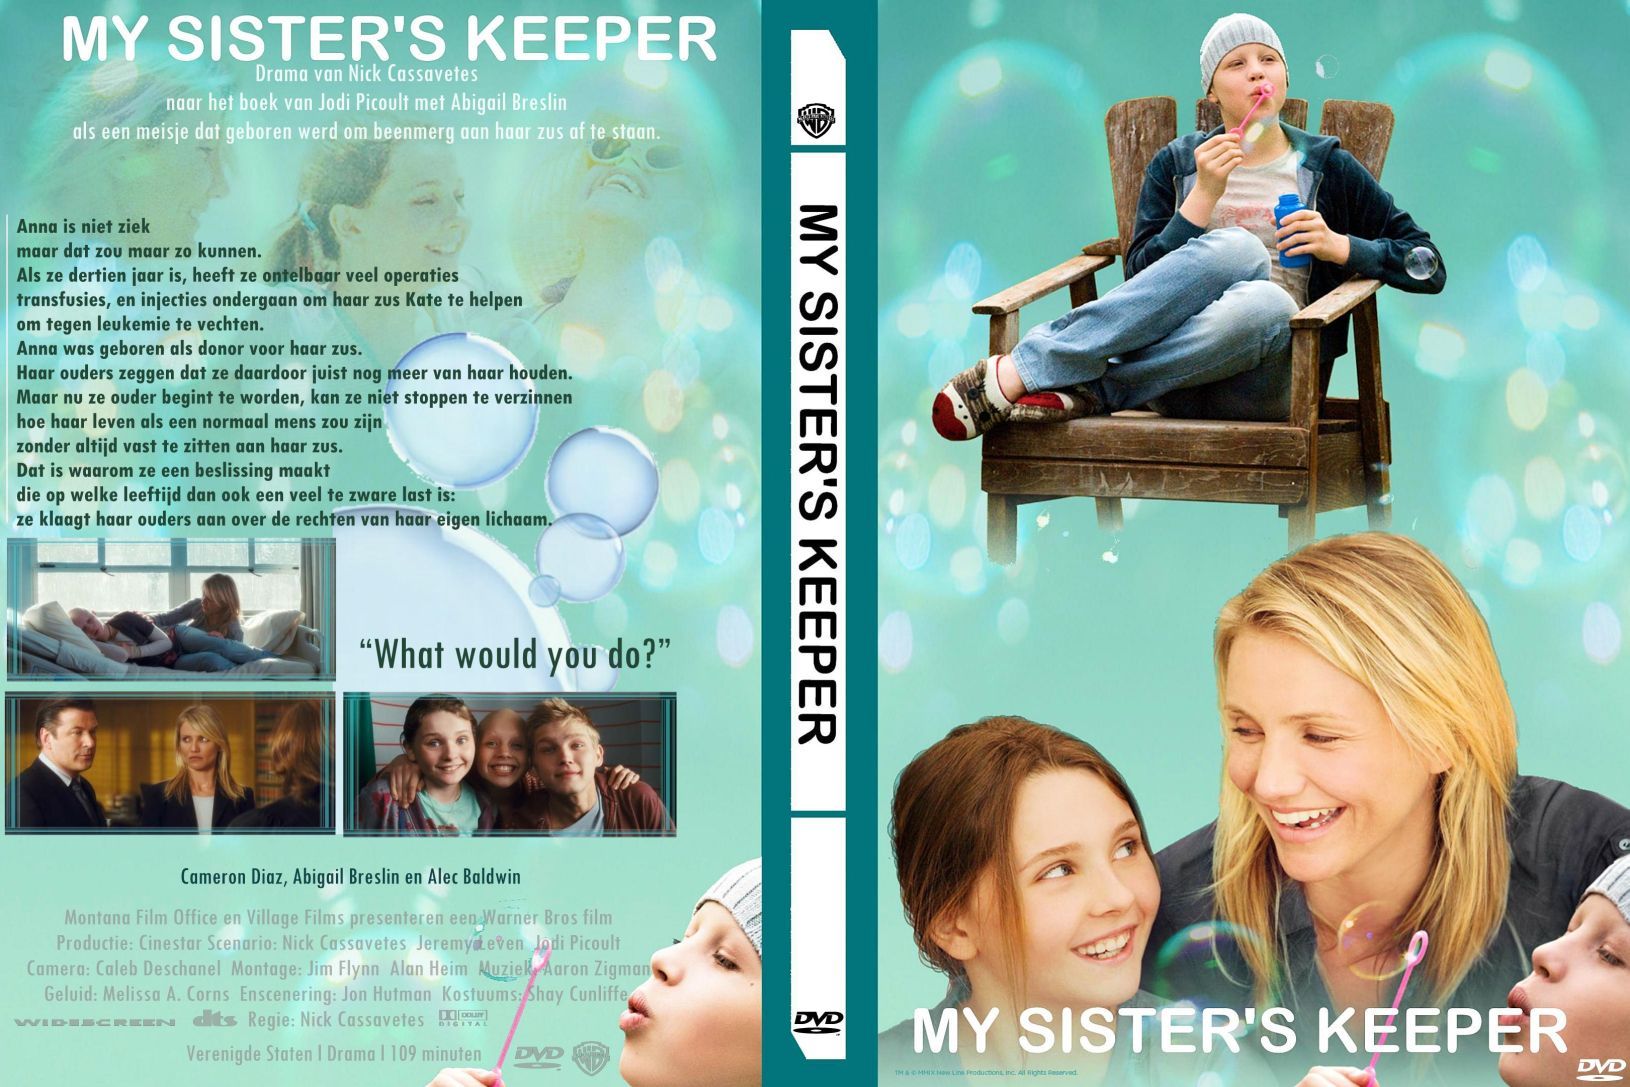 My sister has a book. My sister's Keeper.